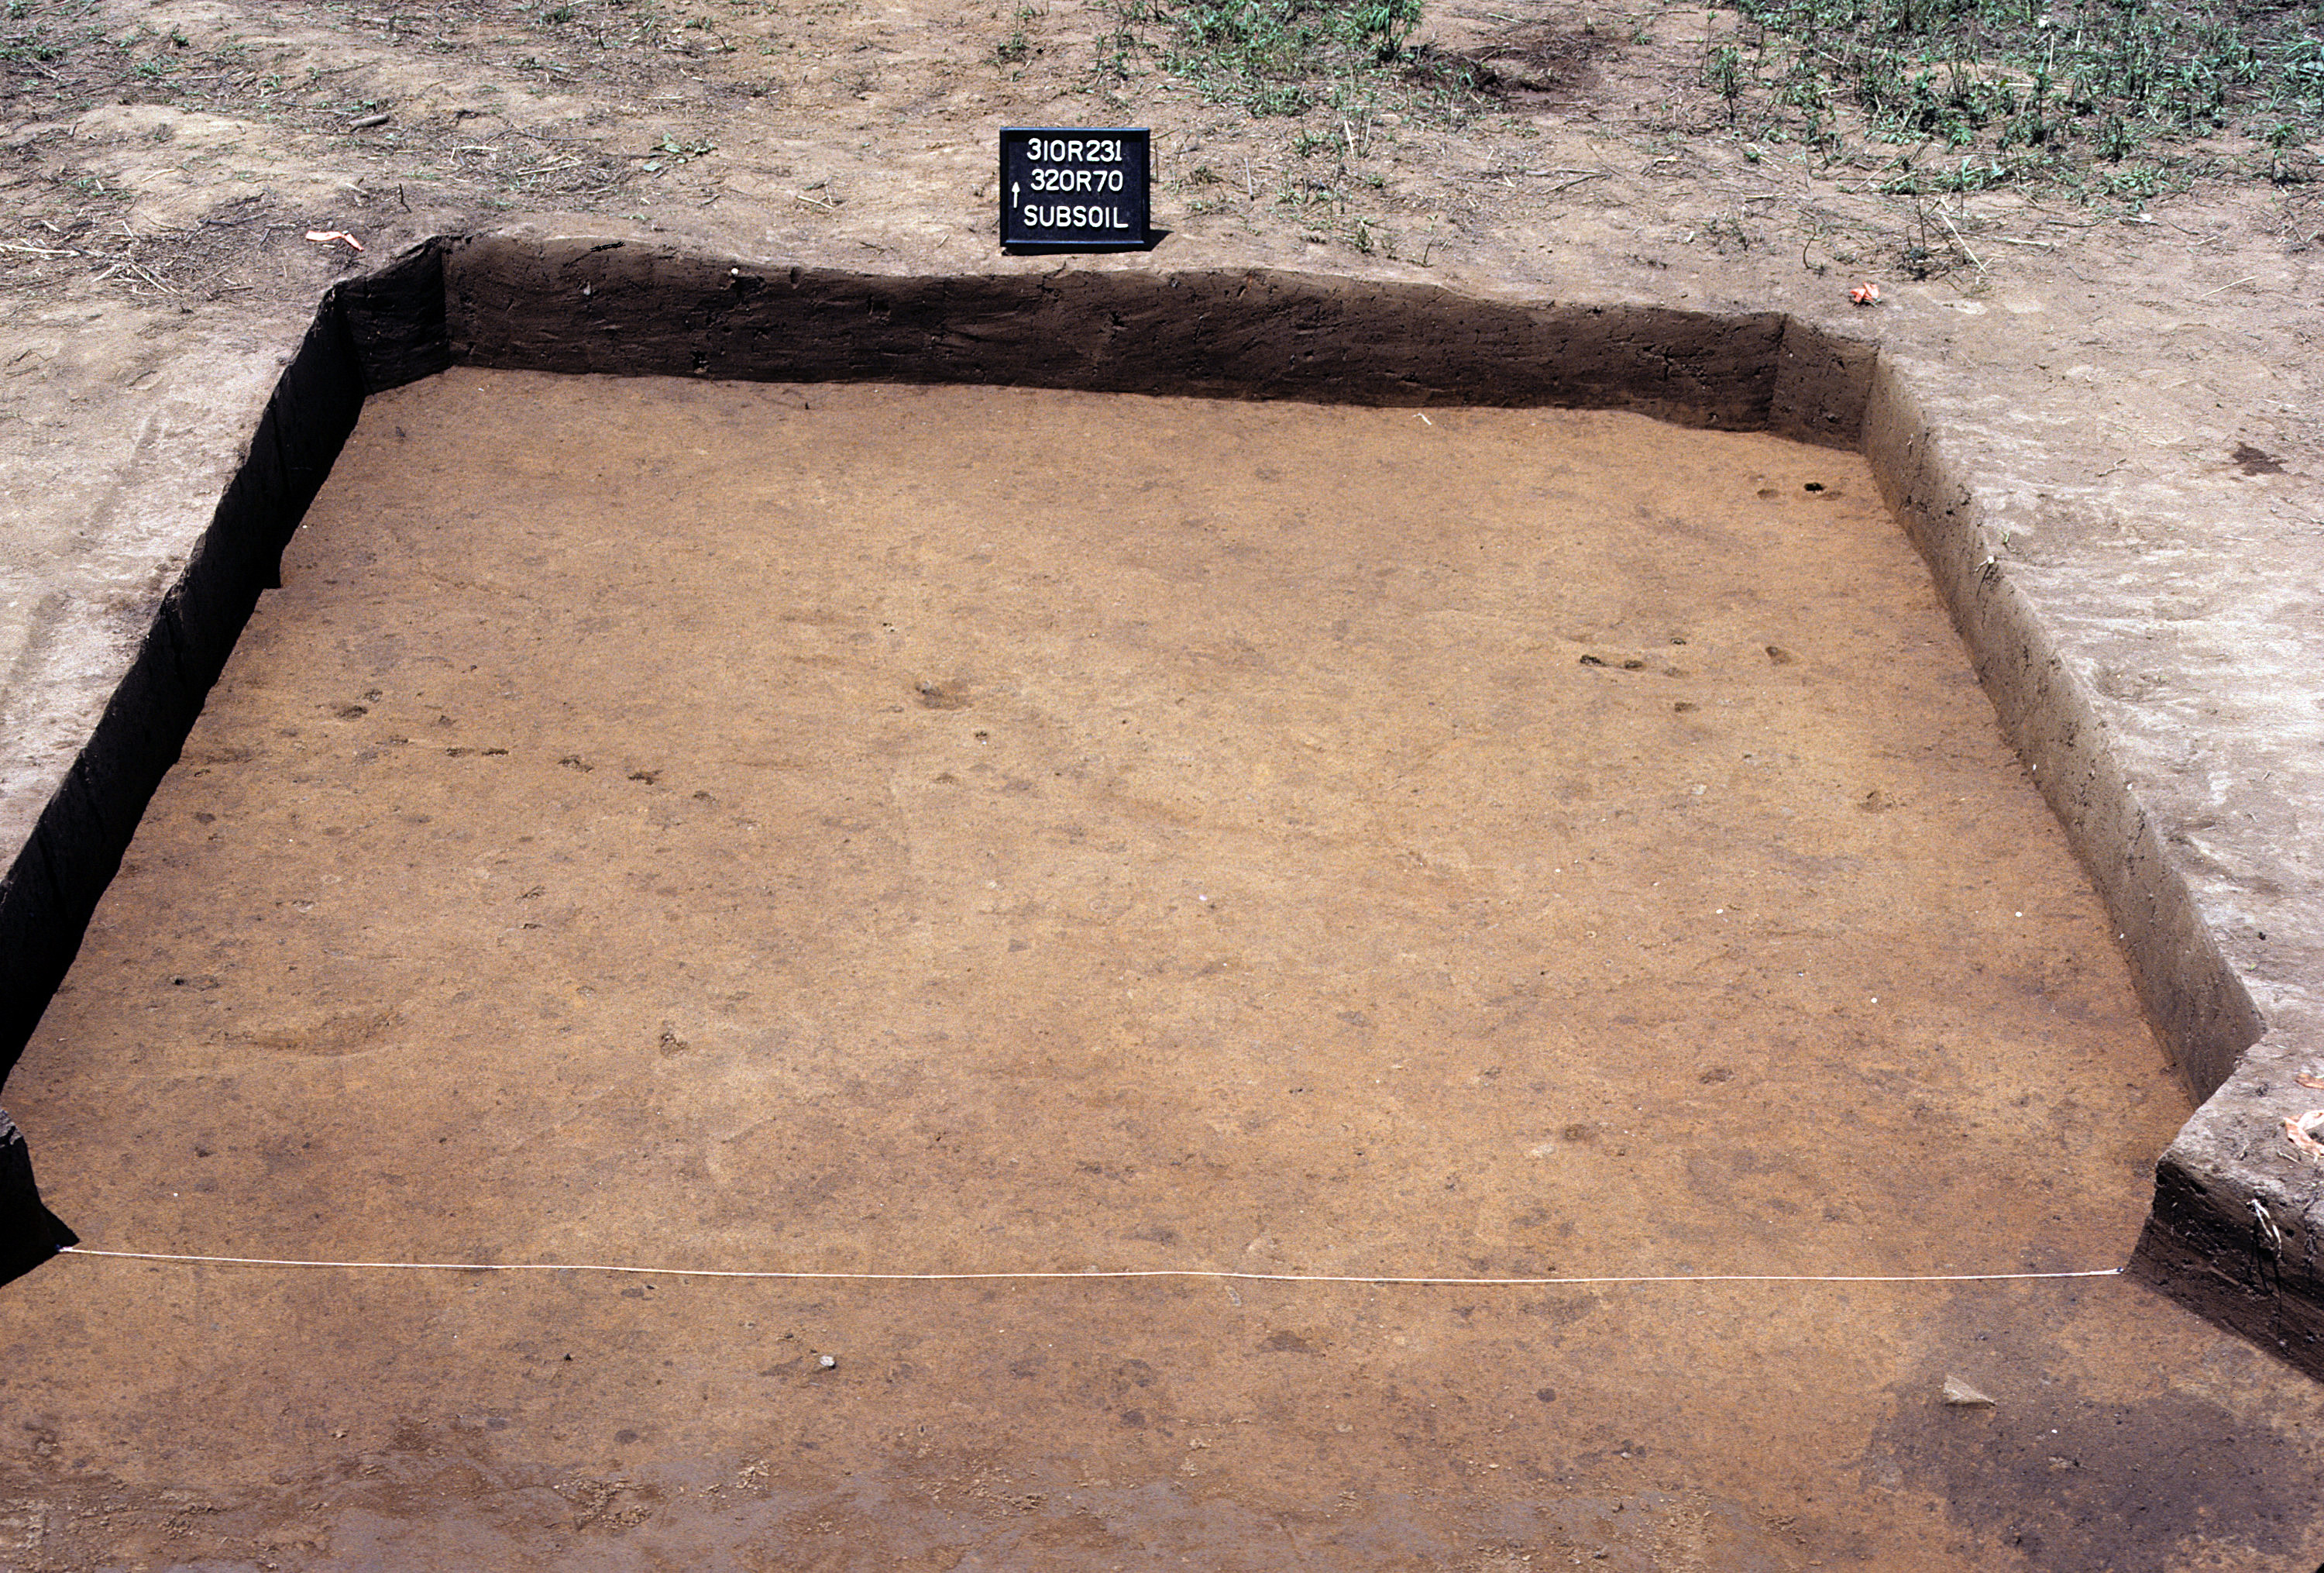 Figure 1033. Sq. 320R70 at top of subsoil (view to north).